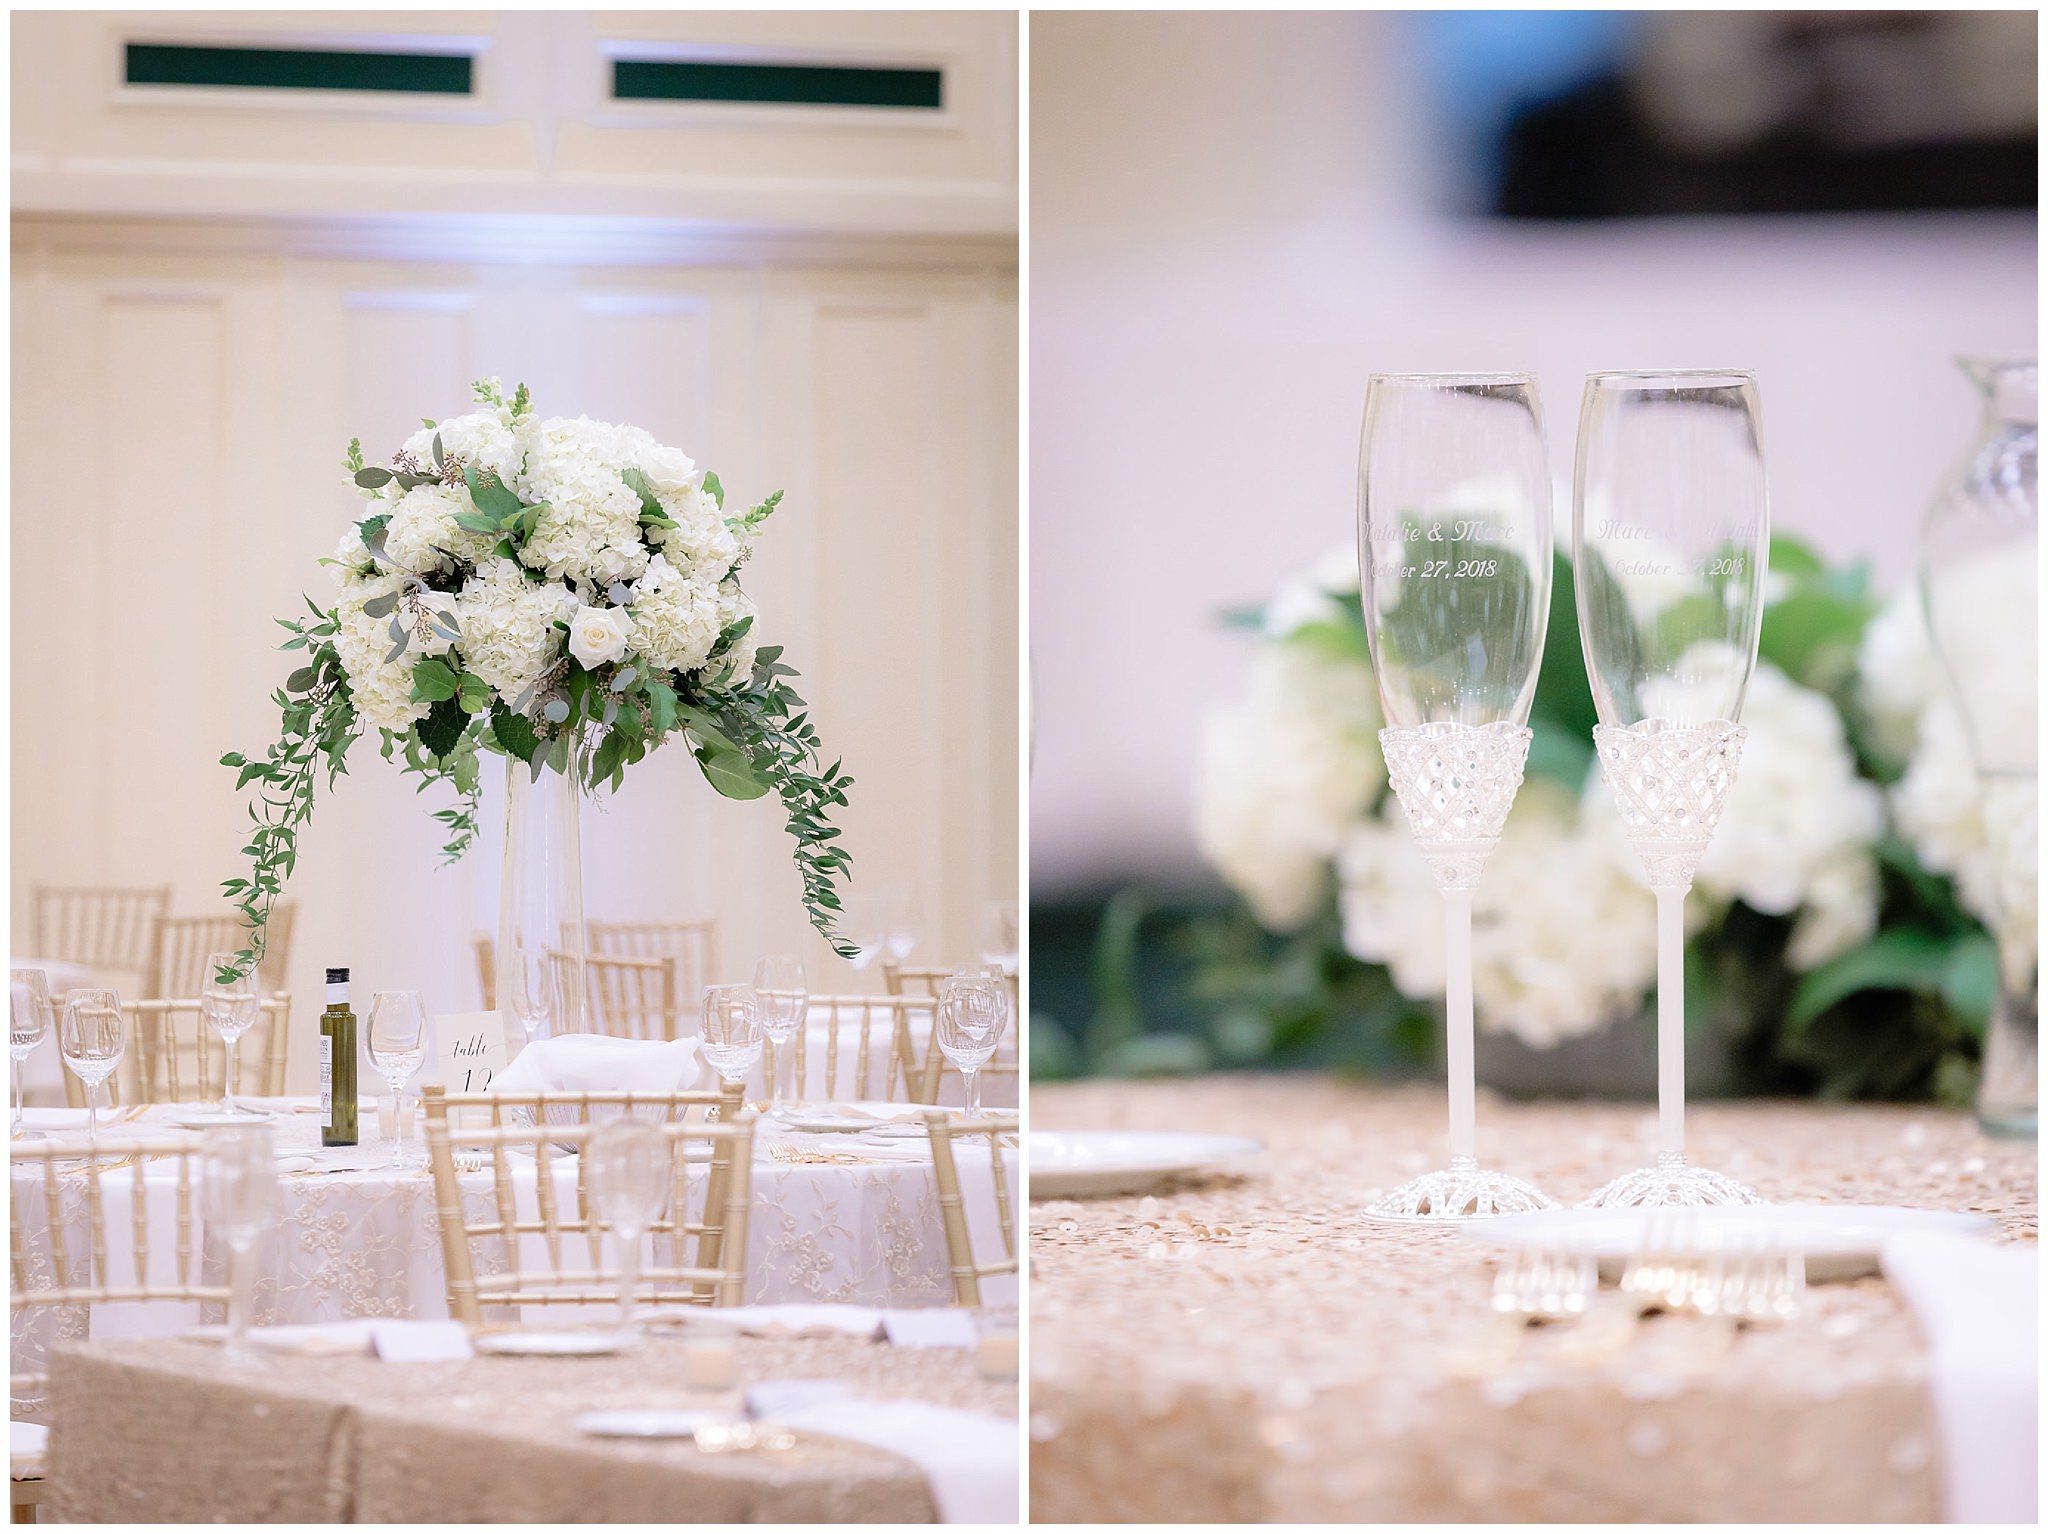 Tall white hydrangea floral centerpieces and champagne flutes at a Soldiers & Sailors wedding reception